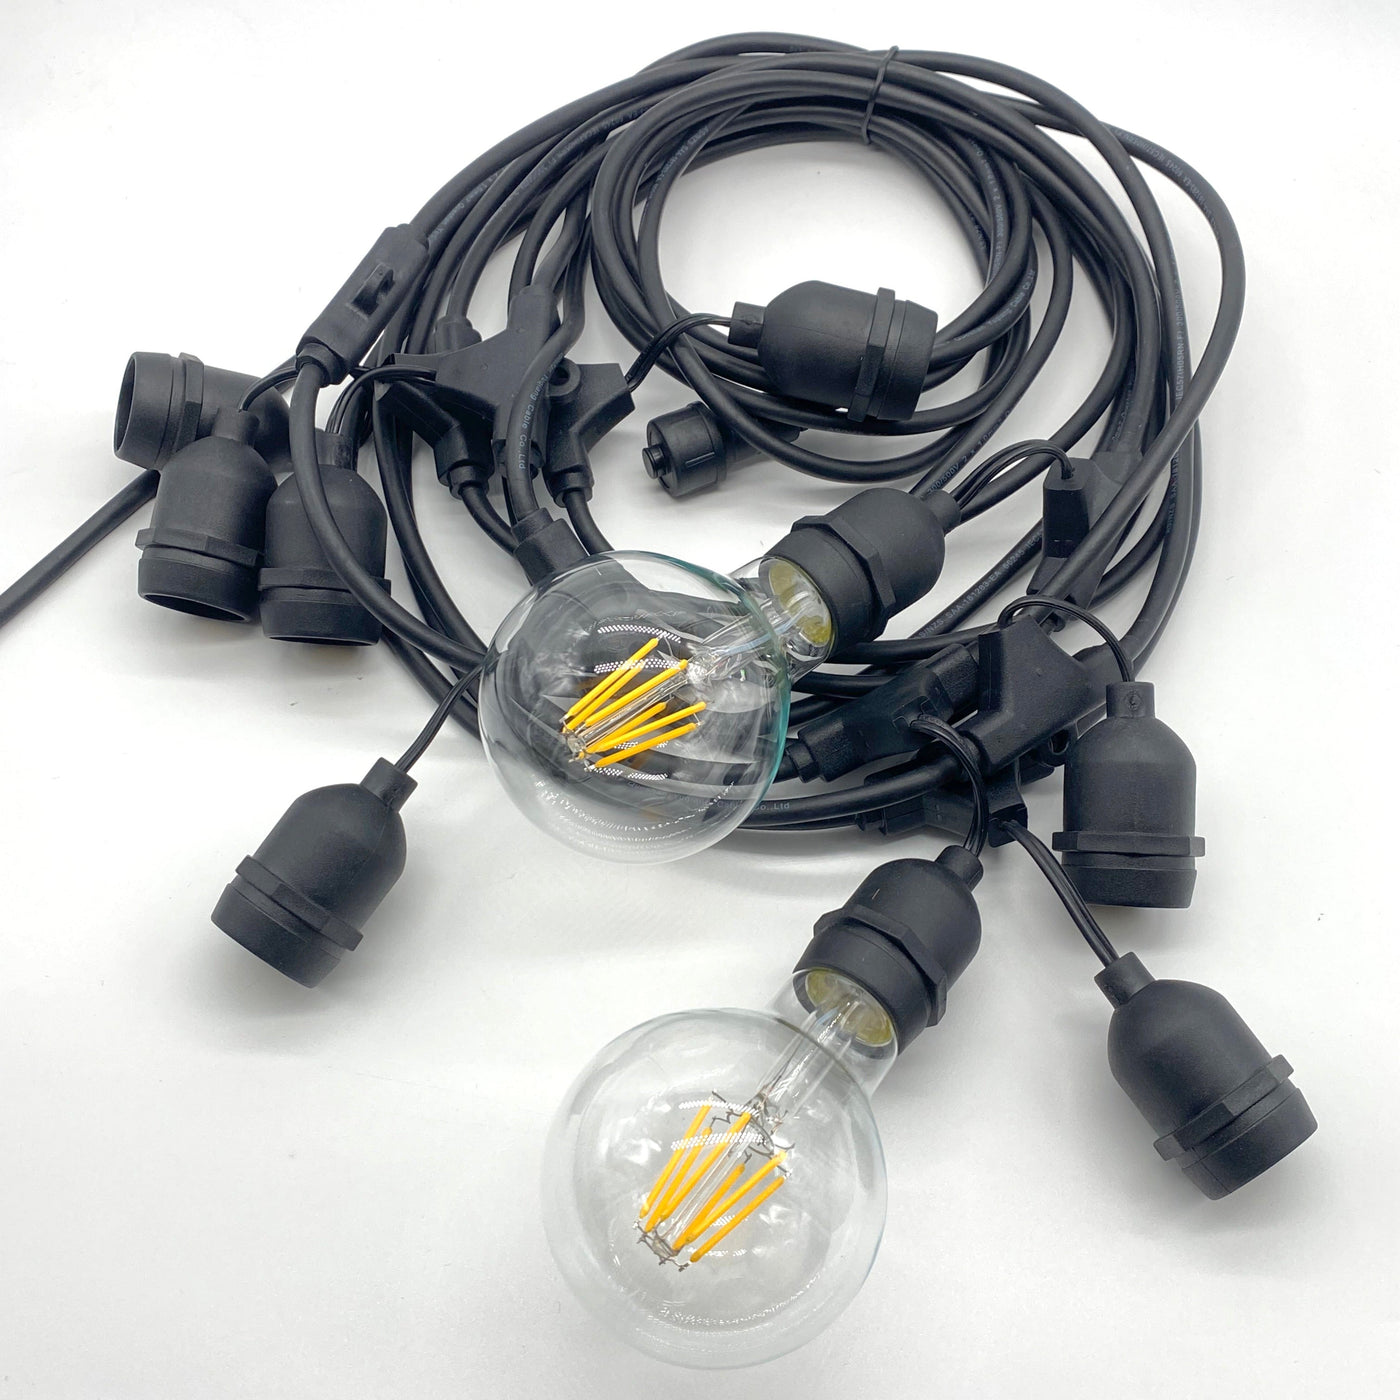 G80 Clear Bulb Festoon Lights from Love Your Lights